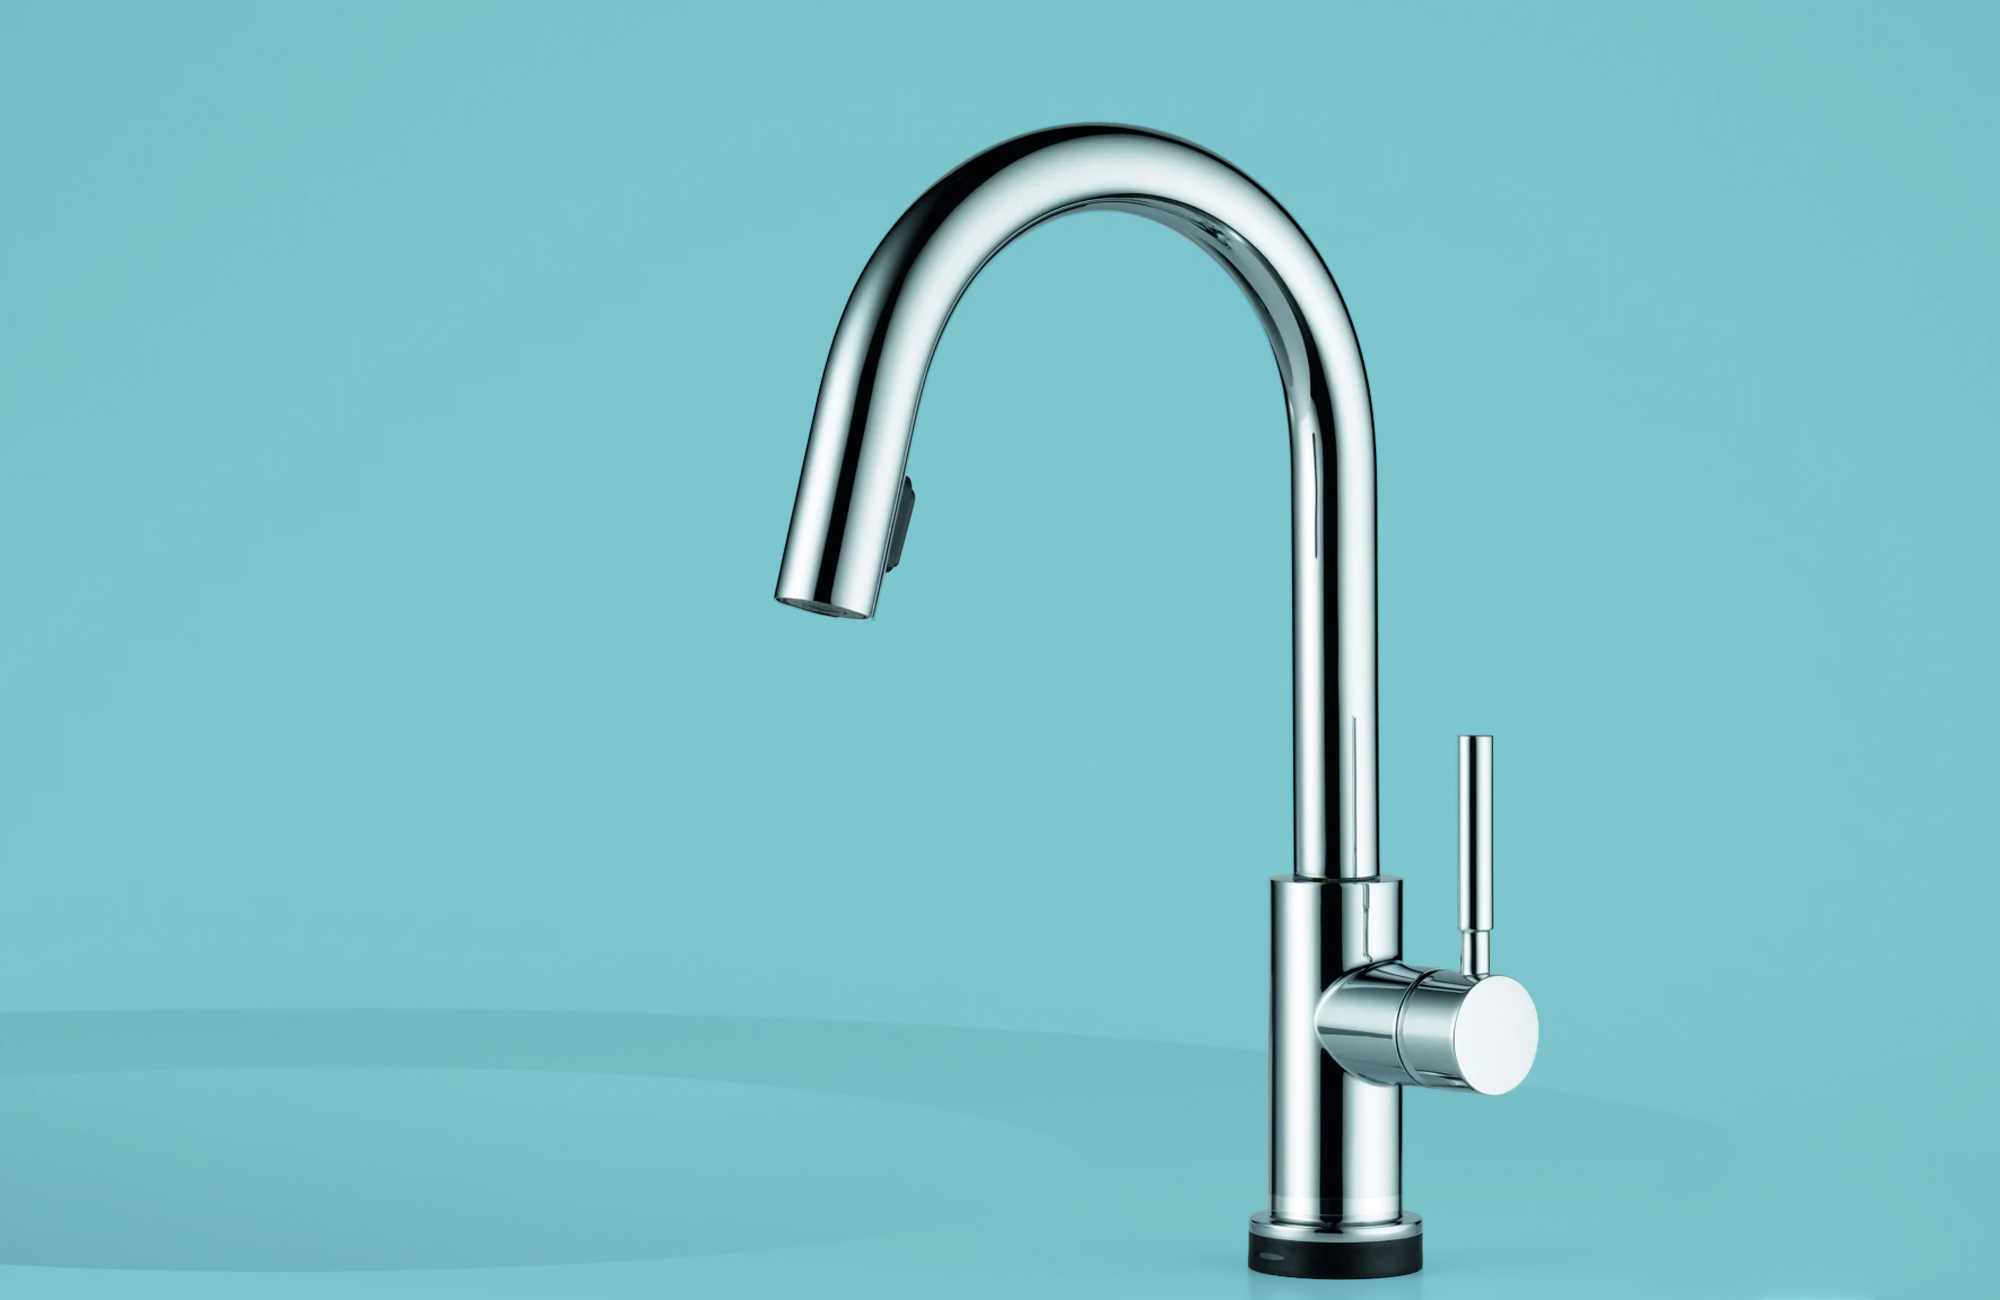 The 10 Best Kitchen Faucets with Pull Down Sprayers in – Robb Report